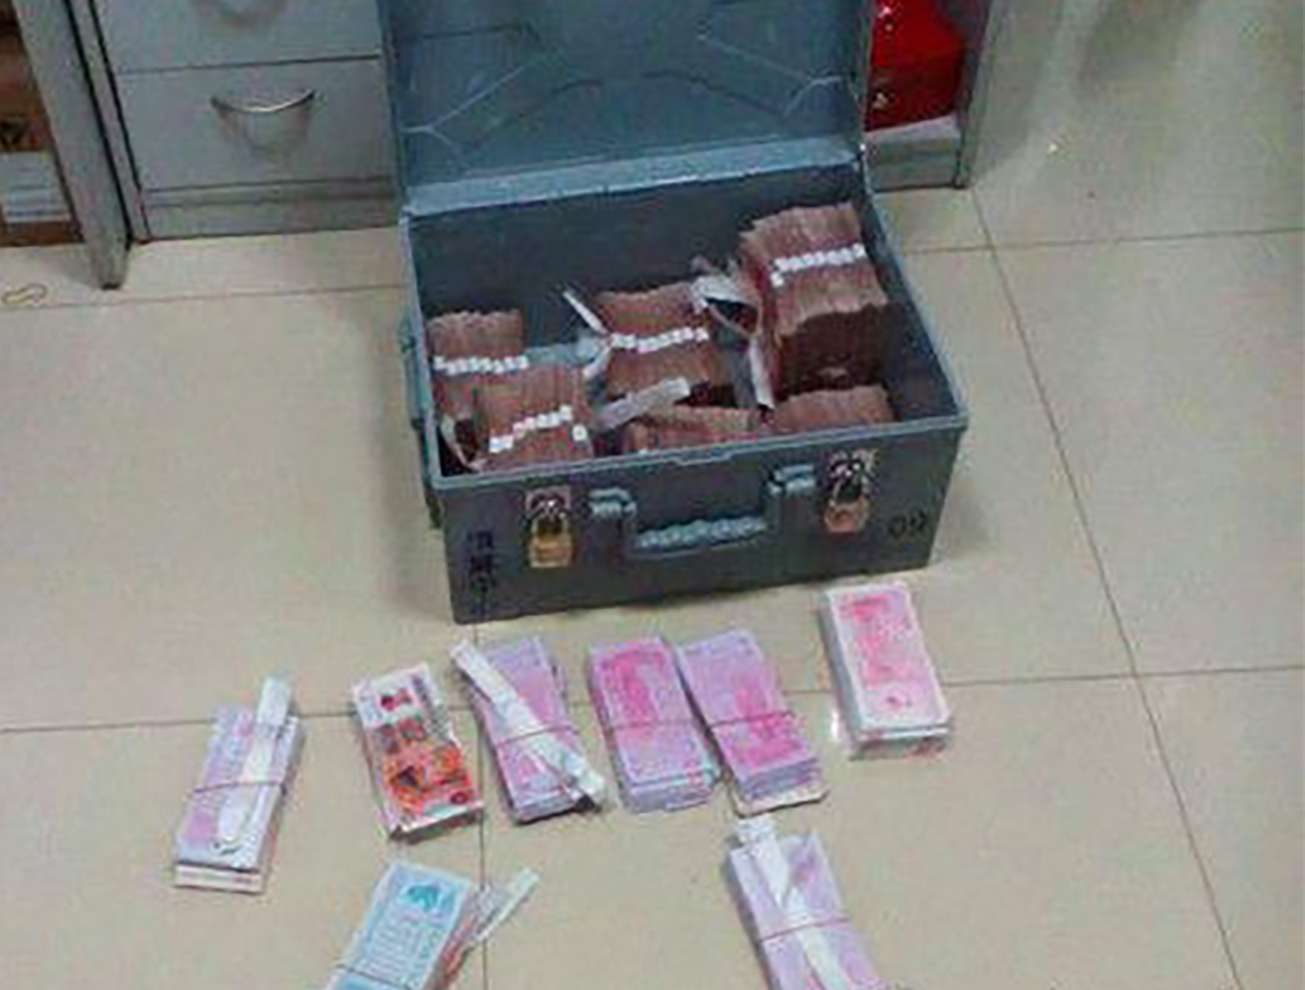 A bank clerk replaced cash he stole with “spirit money”, at front. Photo: SCMP Pictures